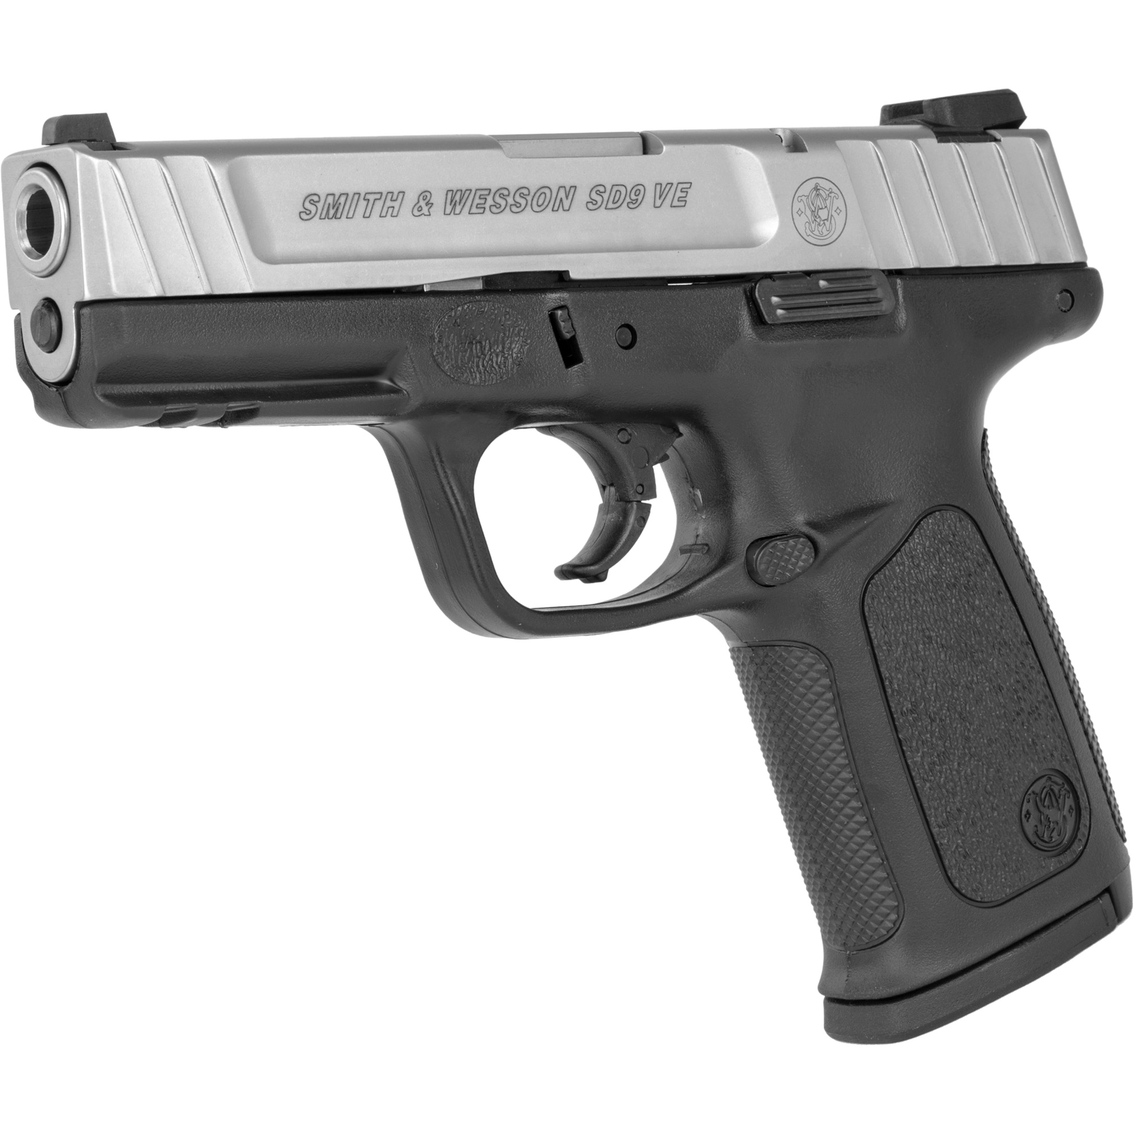 S&W SD9VE 9MM 4 in. Barrel 10 Rds 2-Mags Pistol Stainless Steel - Image 3 of 3